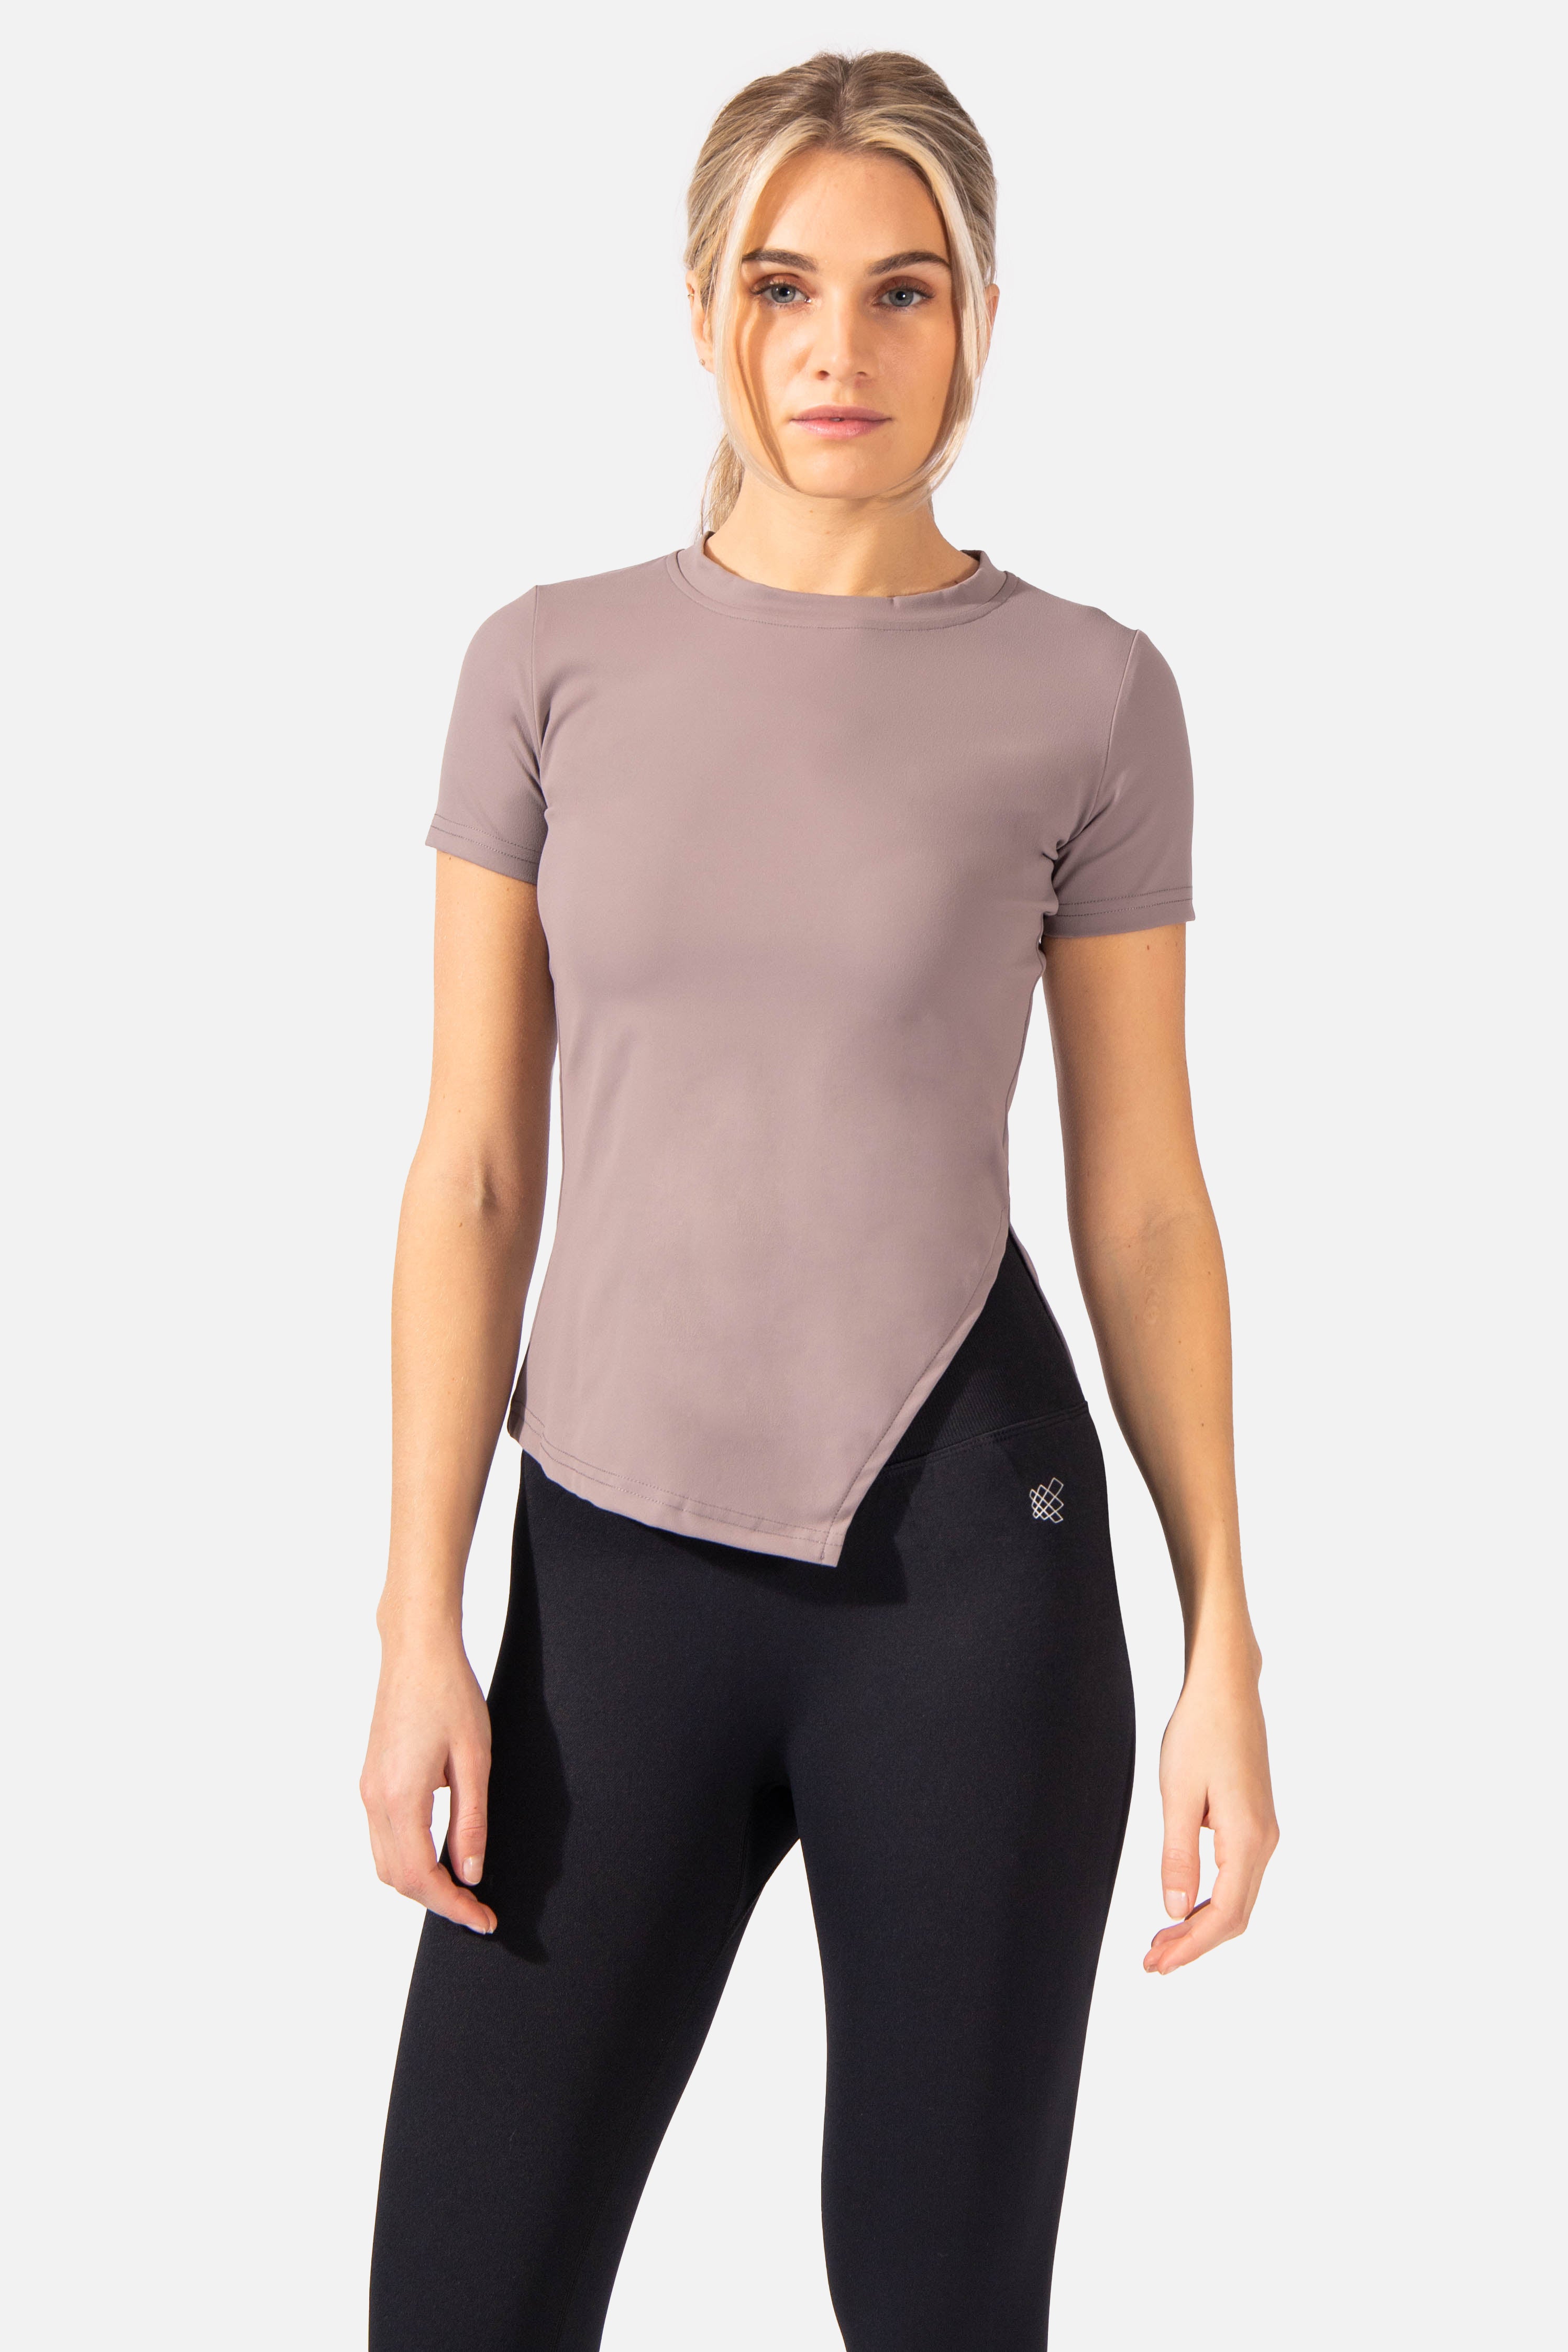 Asymmetrical Fitted Workout T-Shirt - Gray Women's Crop Top Jed North 